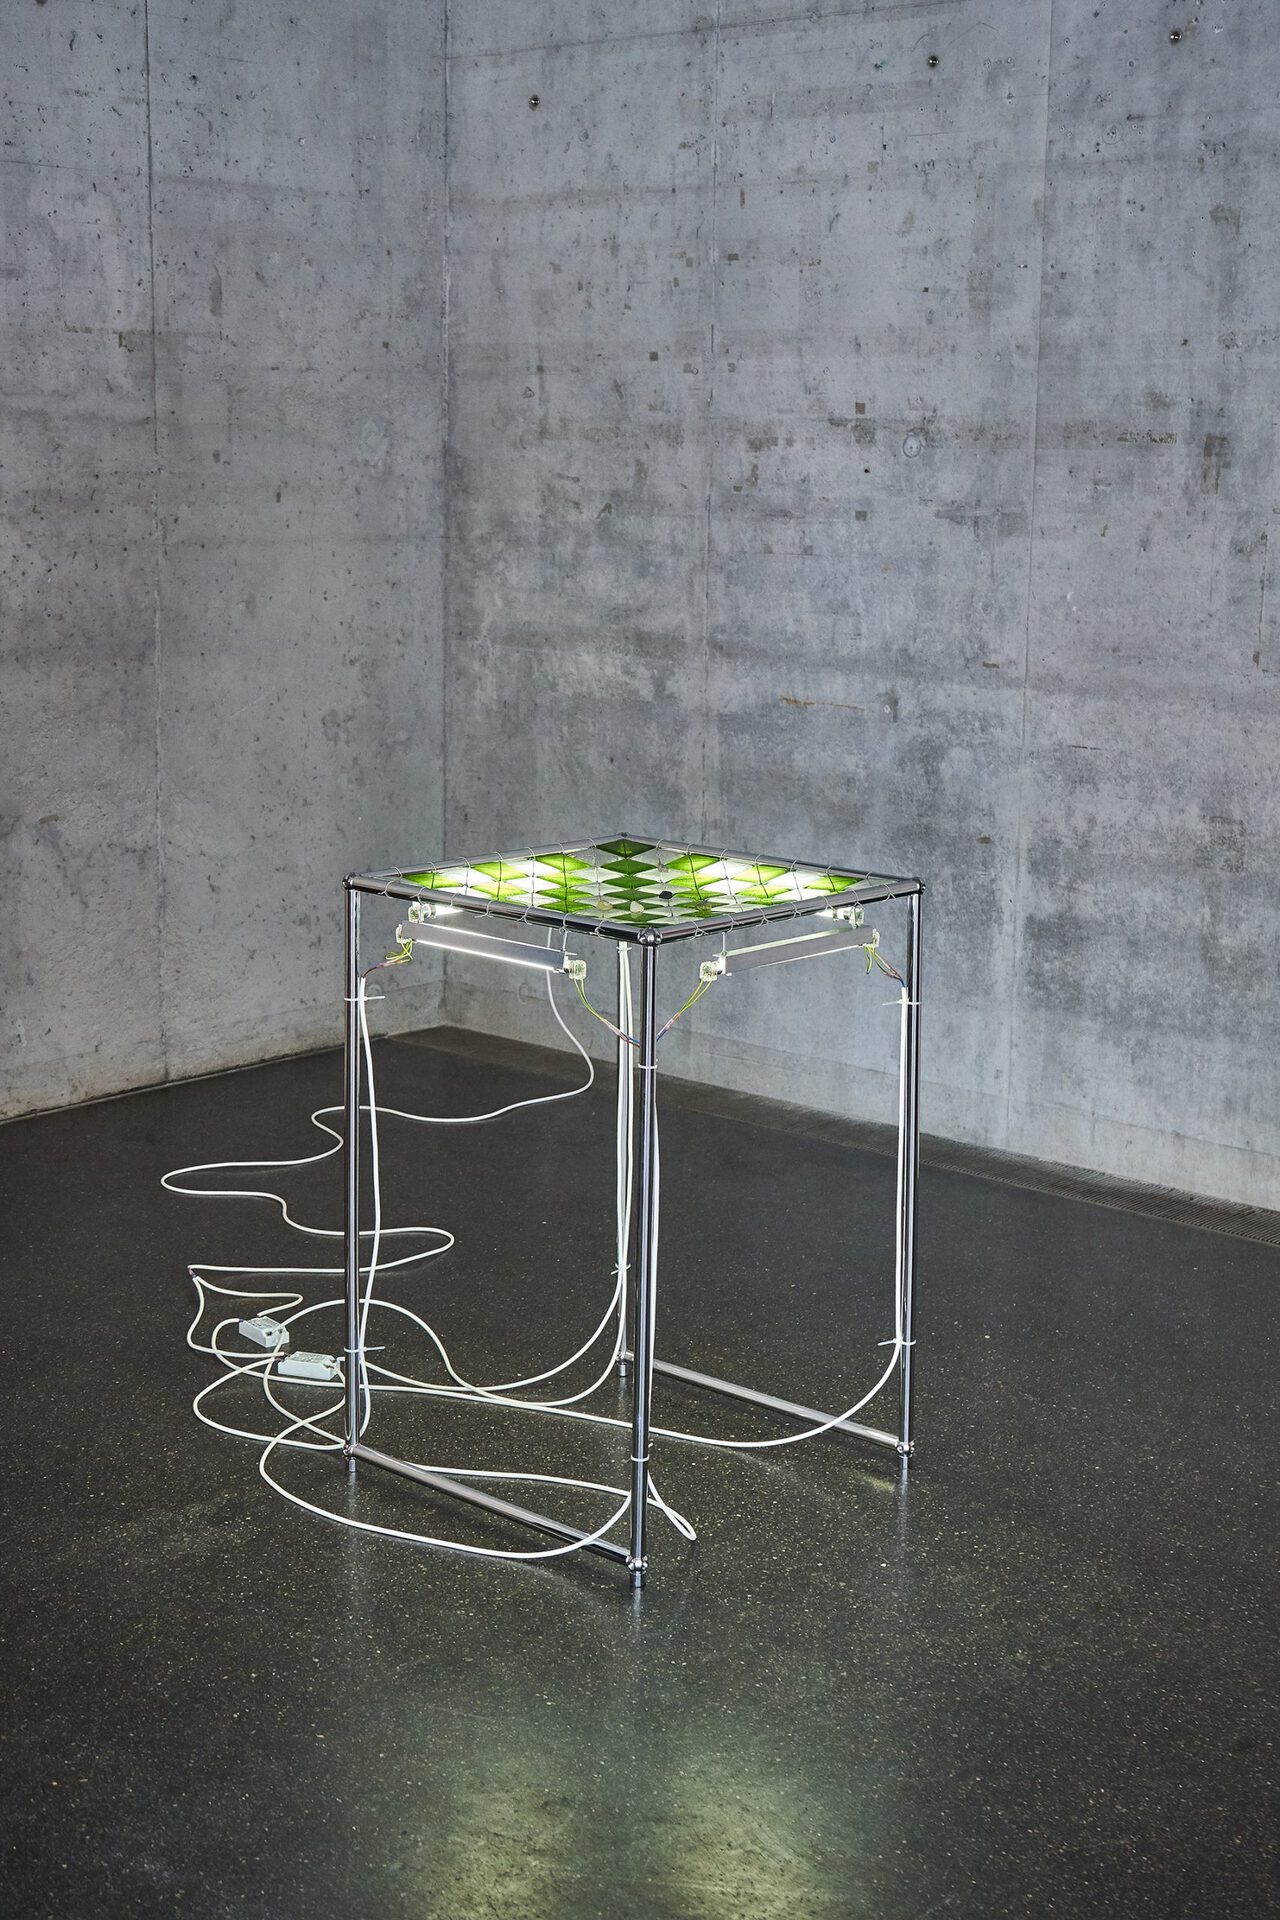 Ju Young Kim, Shape of empty triangle, Fool square. Steel table, Glass tiles, Fluorescent lamp, Electric supply,50x50x70cm (2022)